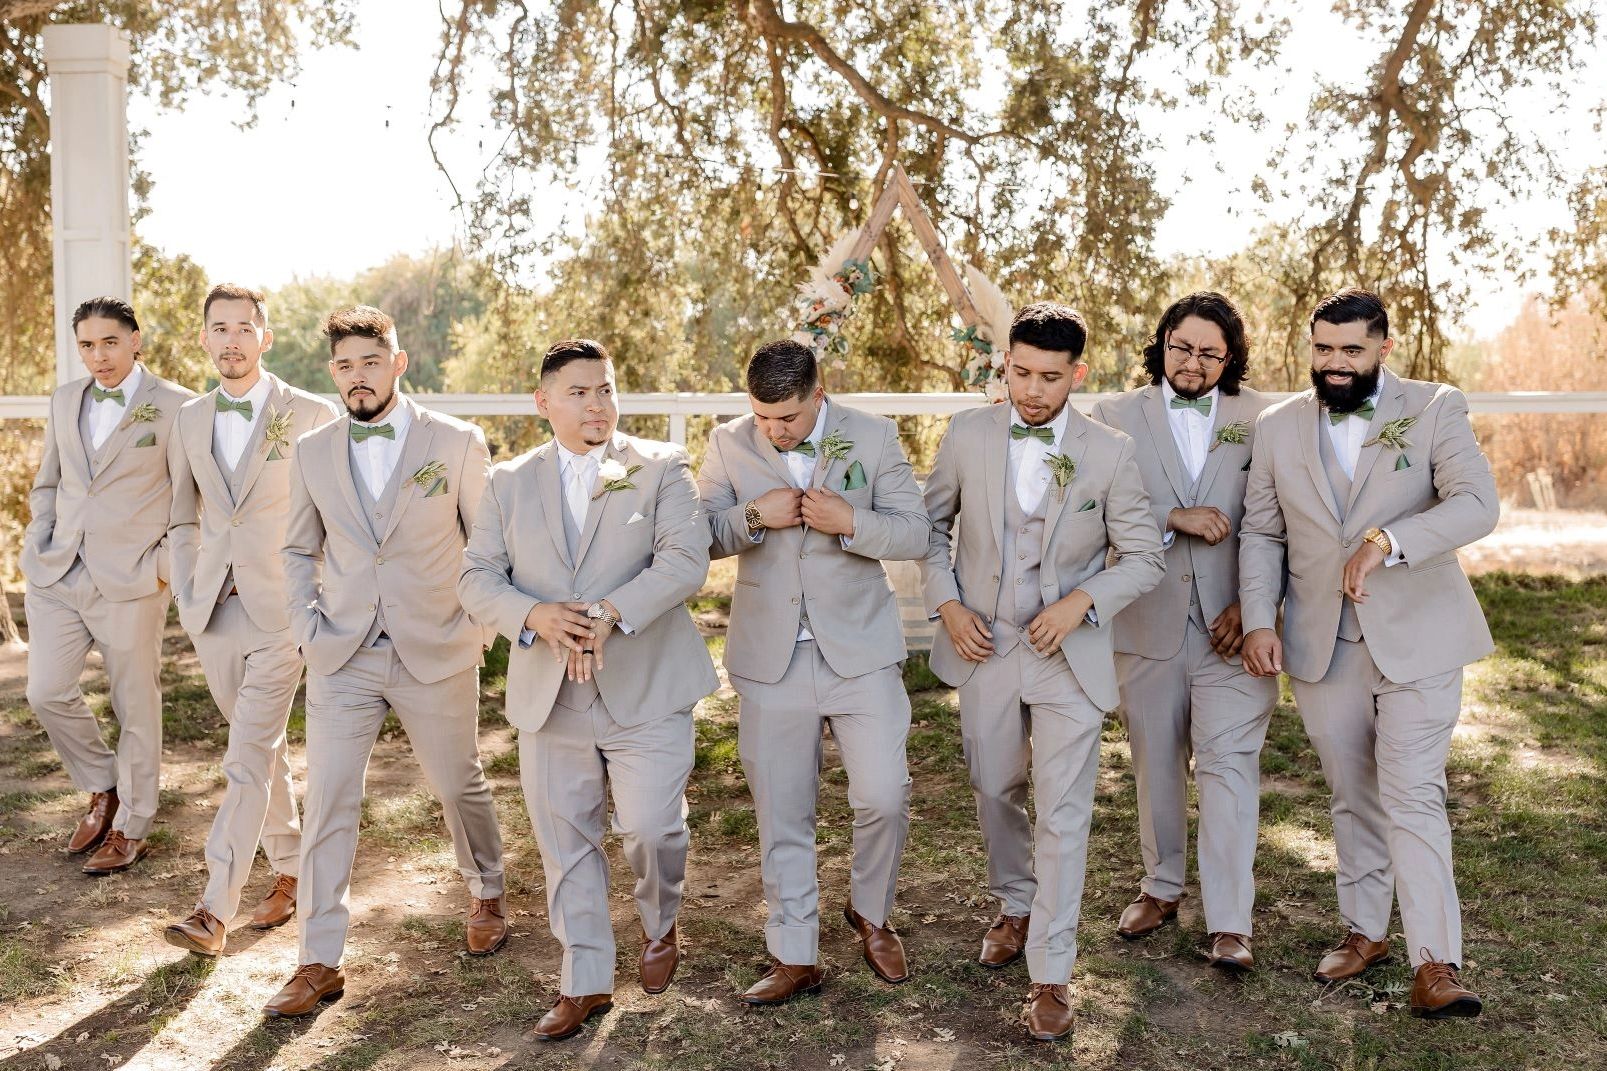 Wedding party wearing suits from Elizabeth's Bridal